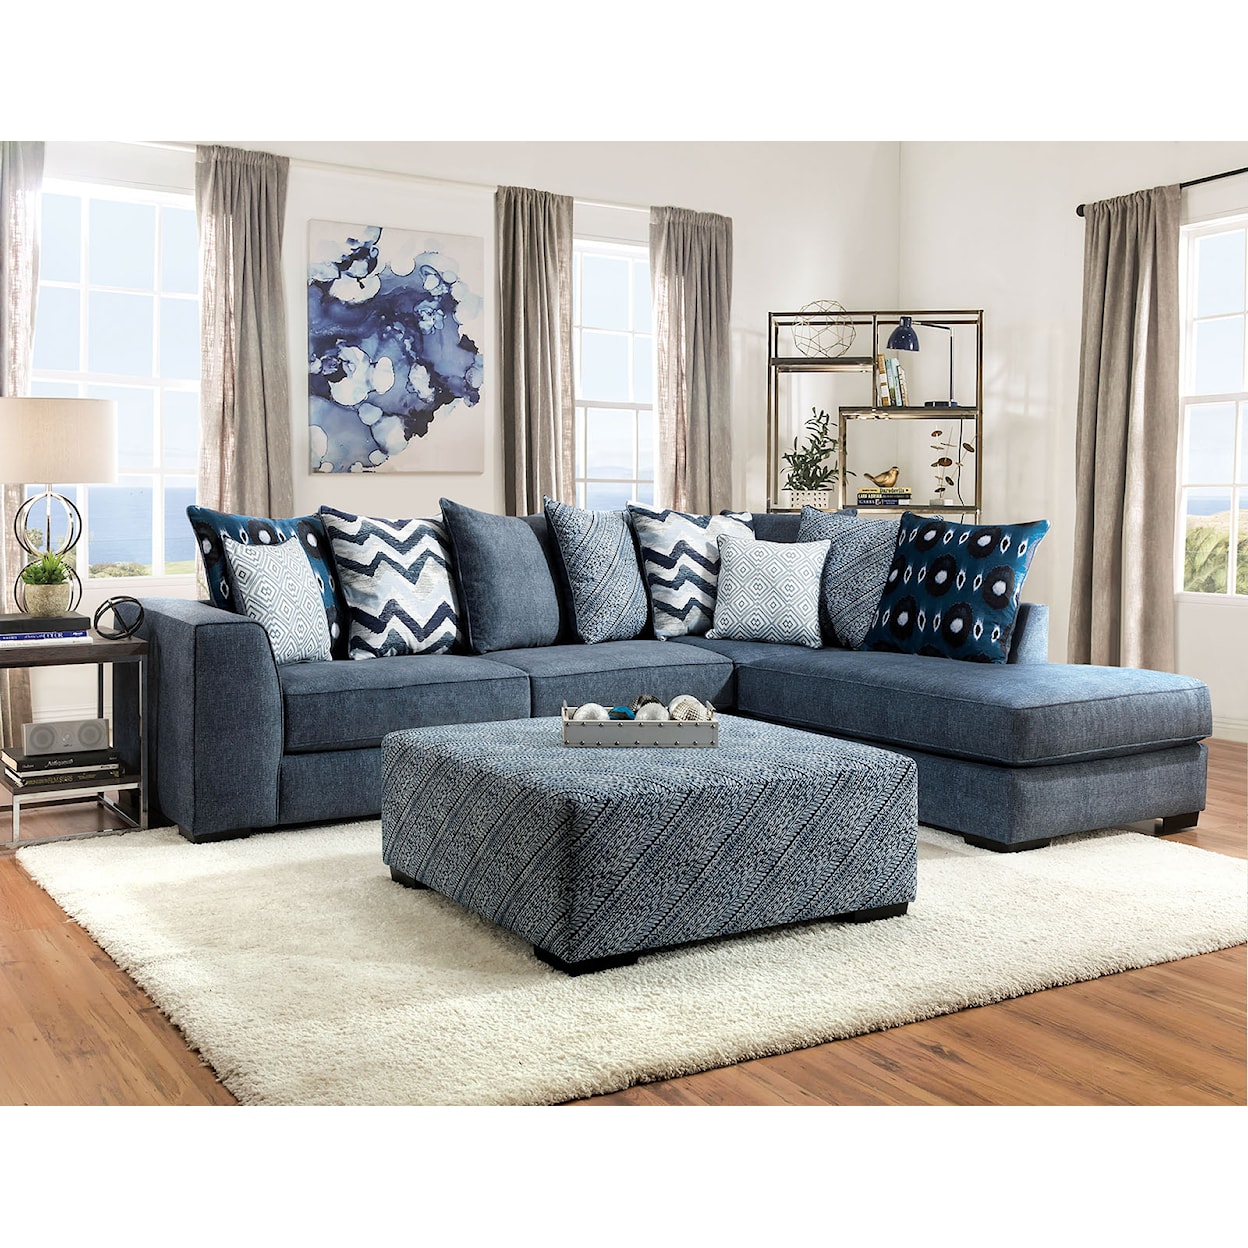 Furniture of America Brielle Sectional